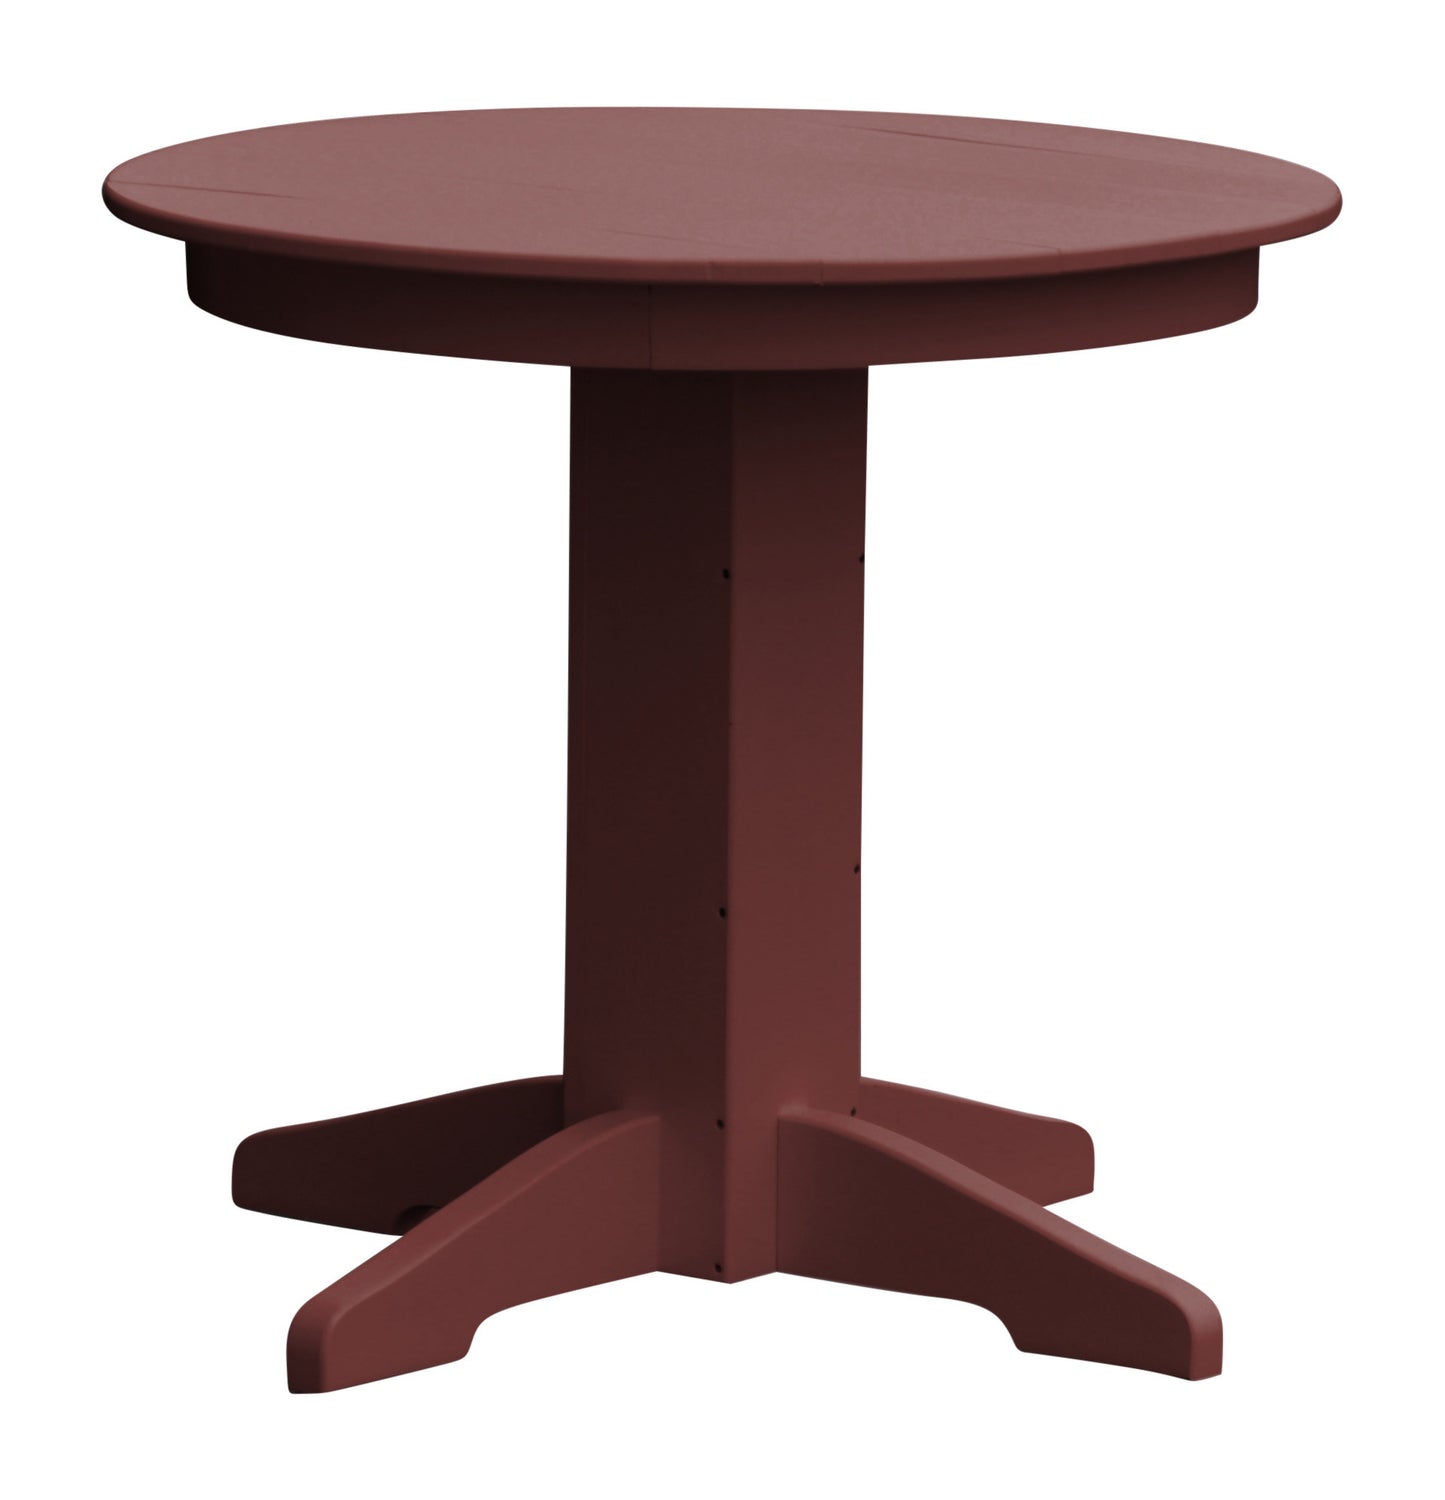 A&L Furniture Recycled Plastic 33" Round Dining Table - Cherrywood